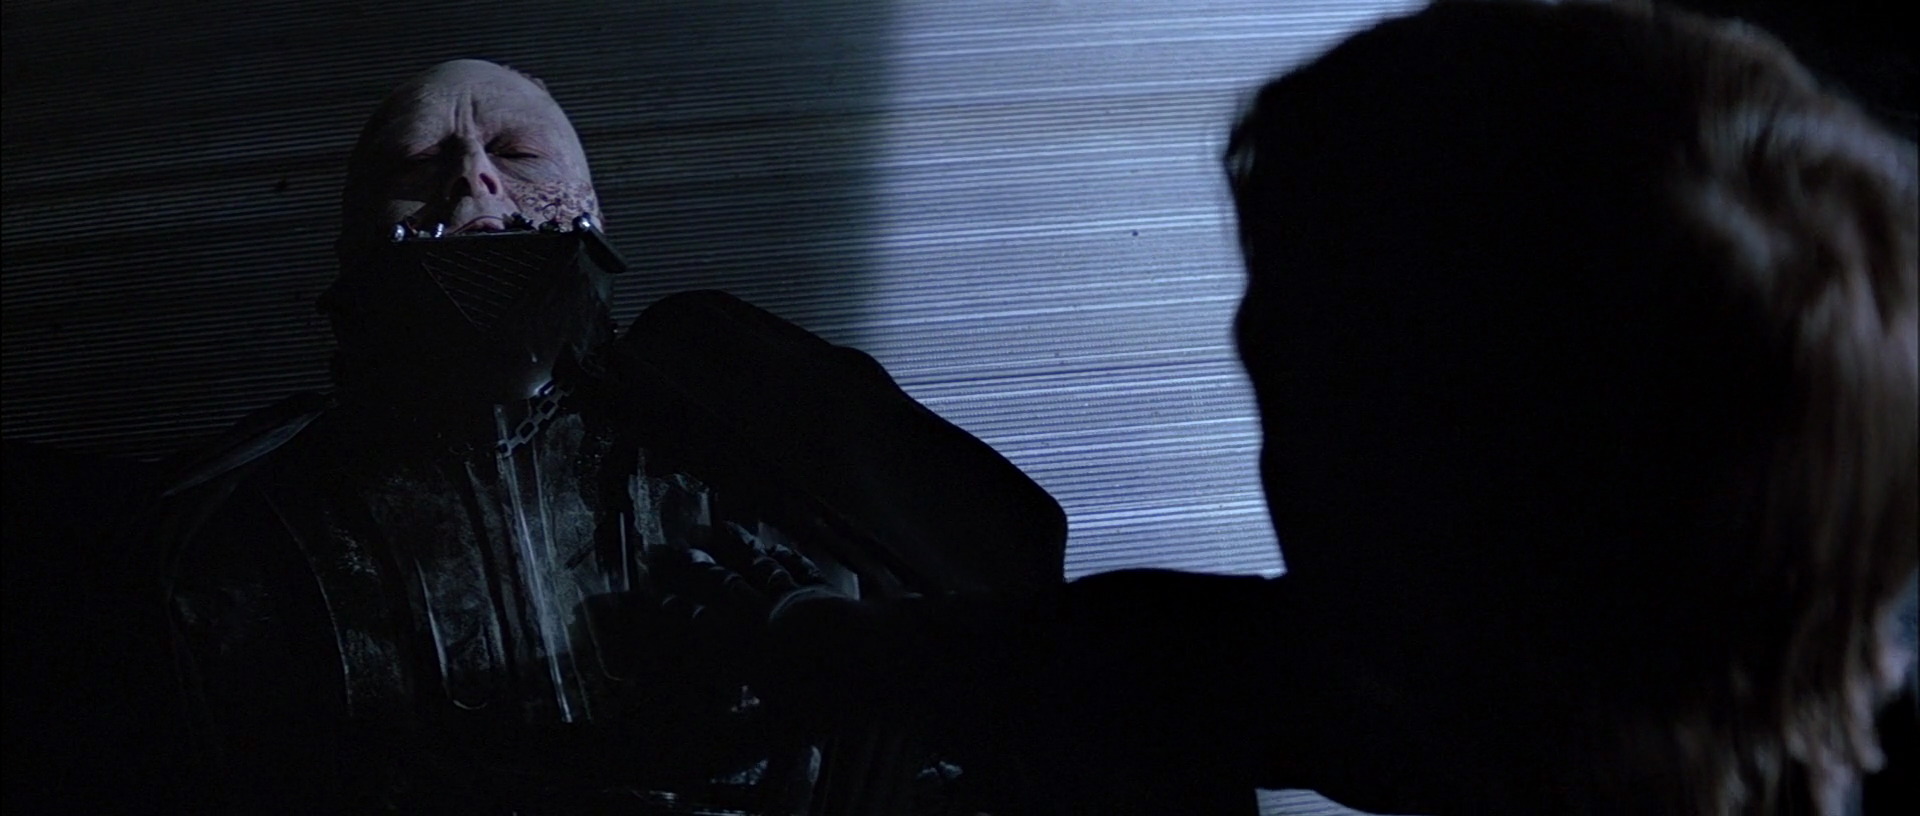 Return Of The Jedi, Darth Vader is mortally wounded saving his son Luke Skywalker from the Emperor...